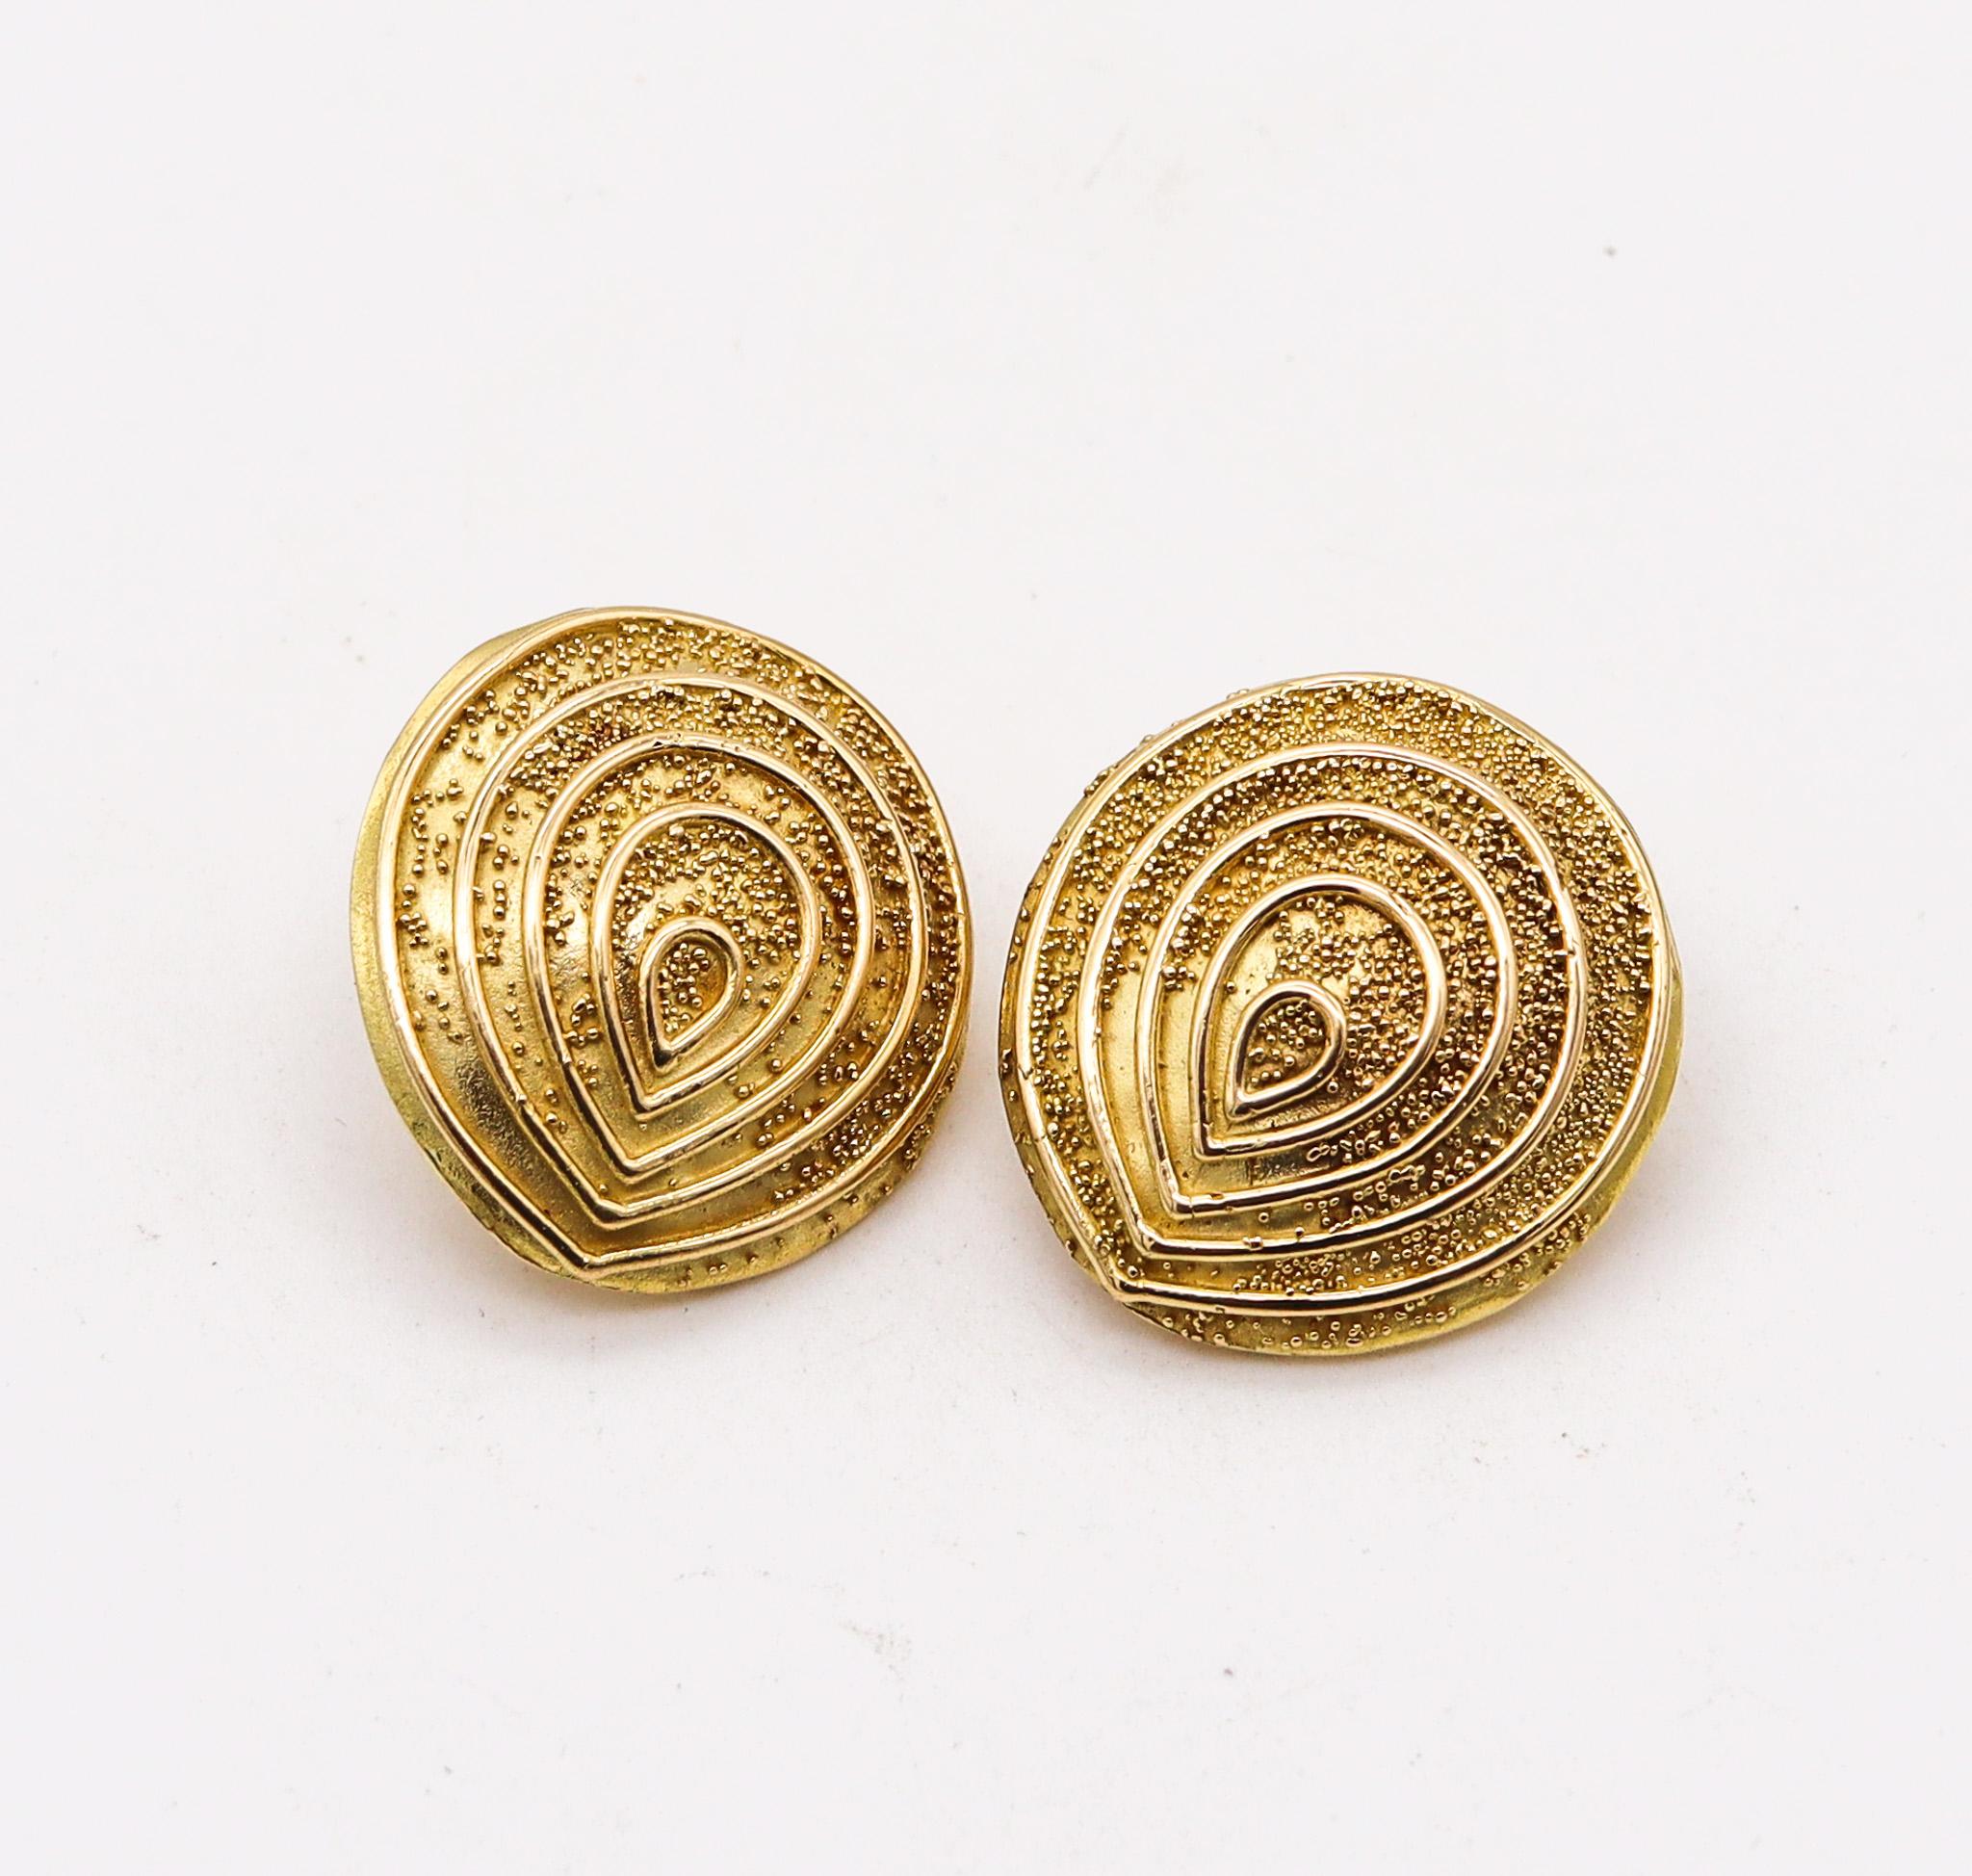 Sculptural pair of earrings designed by Elizabeth Gage.

Beautiful sculptural clip-on earrings, created in London England by the jewelry designer Elizabeth Gage, back in the 1990. These earrings have been made in an ovoid bombe shape, with a pattern